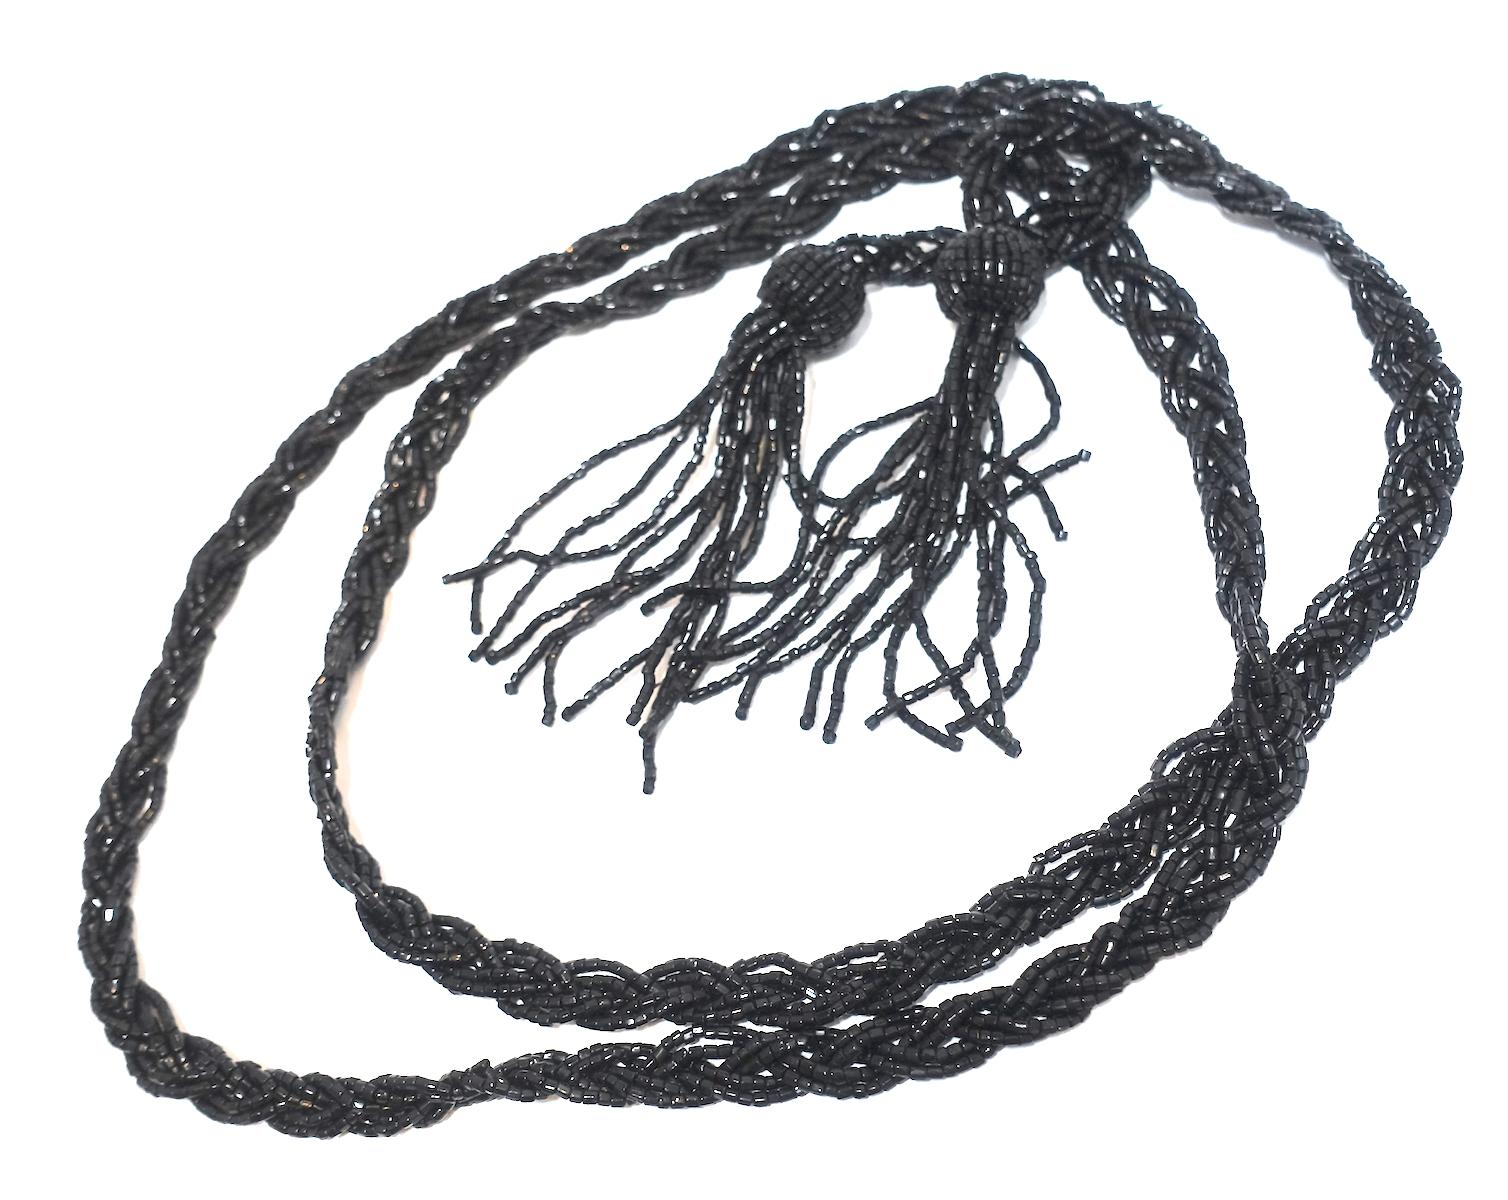 Vintage Art Deco 1920s Black Bead Torsade Tassels Necklace In Excellent Condition For Sale In New York, NY